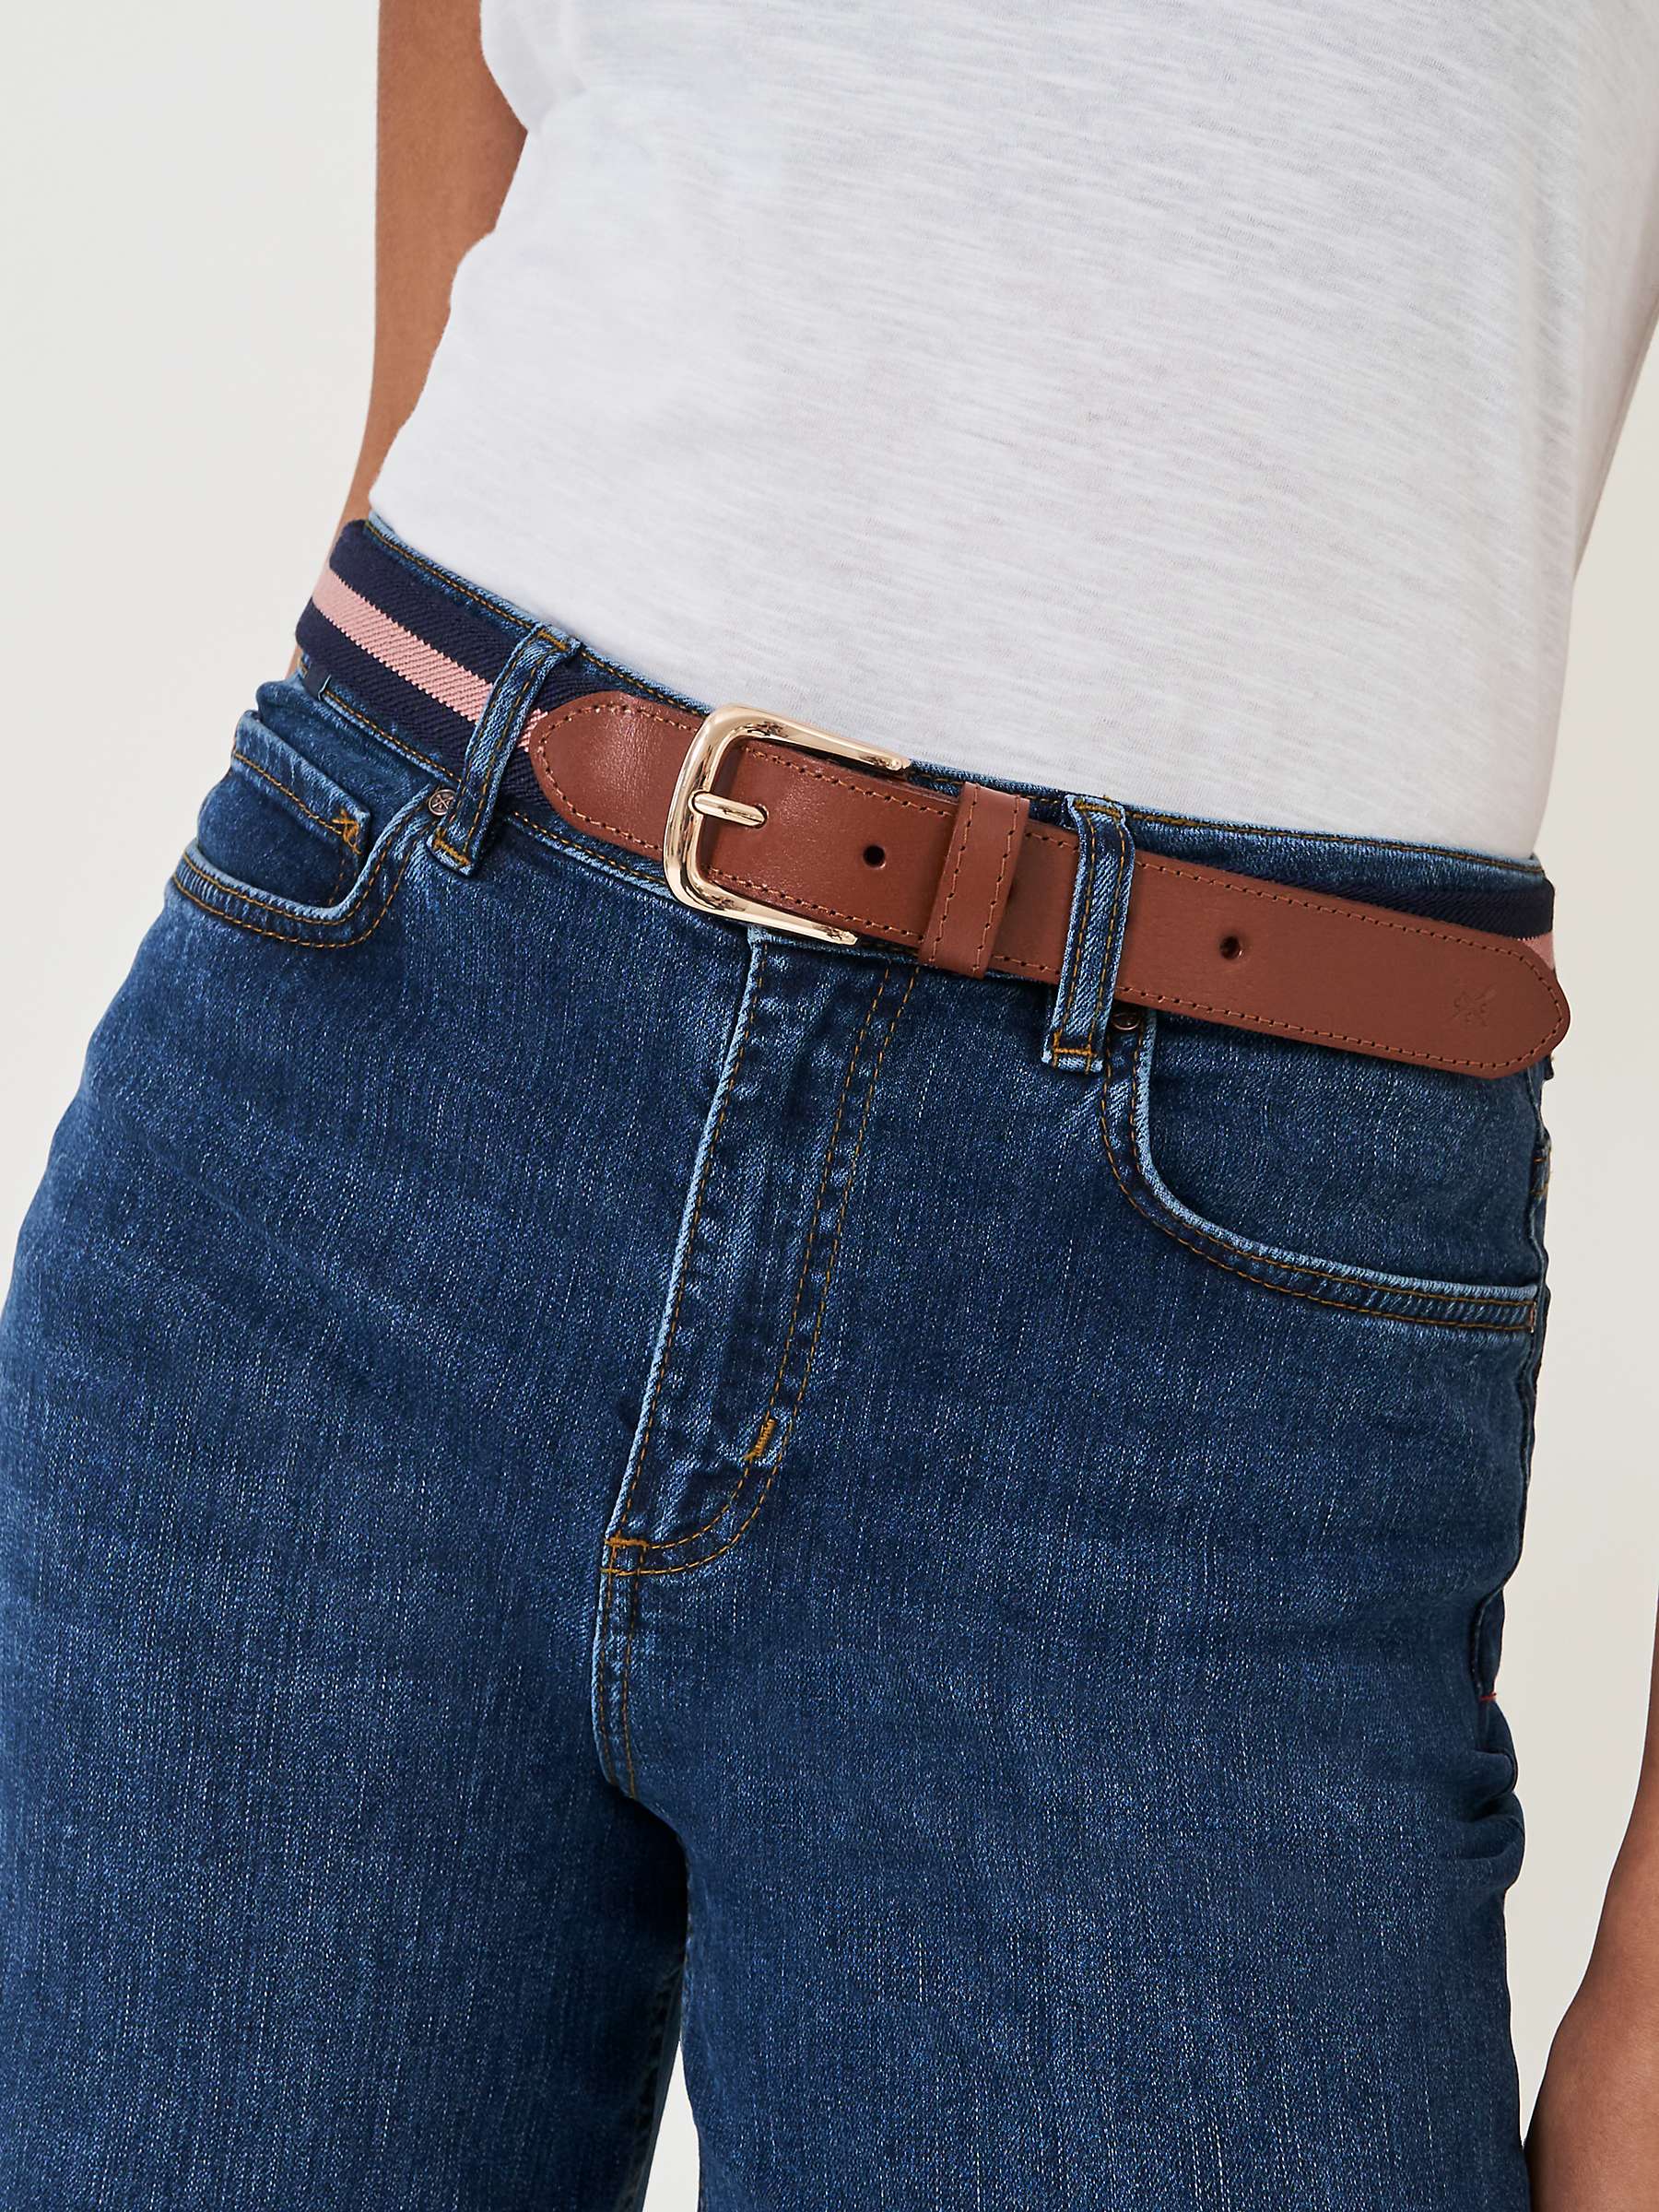 Buy Crew Clothing Striped Woven Belt, Pink/Multi Online at johnlewis.com